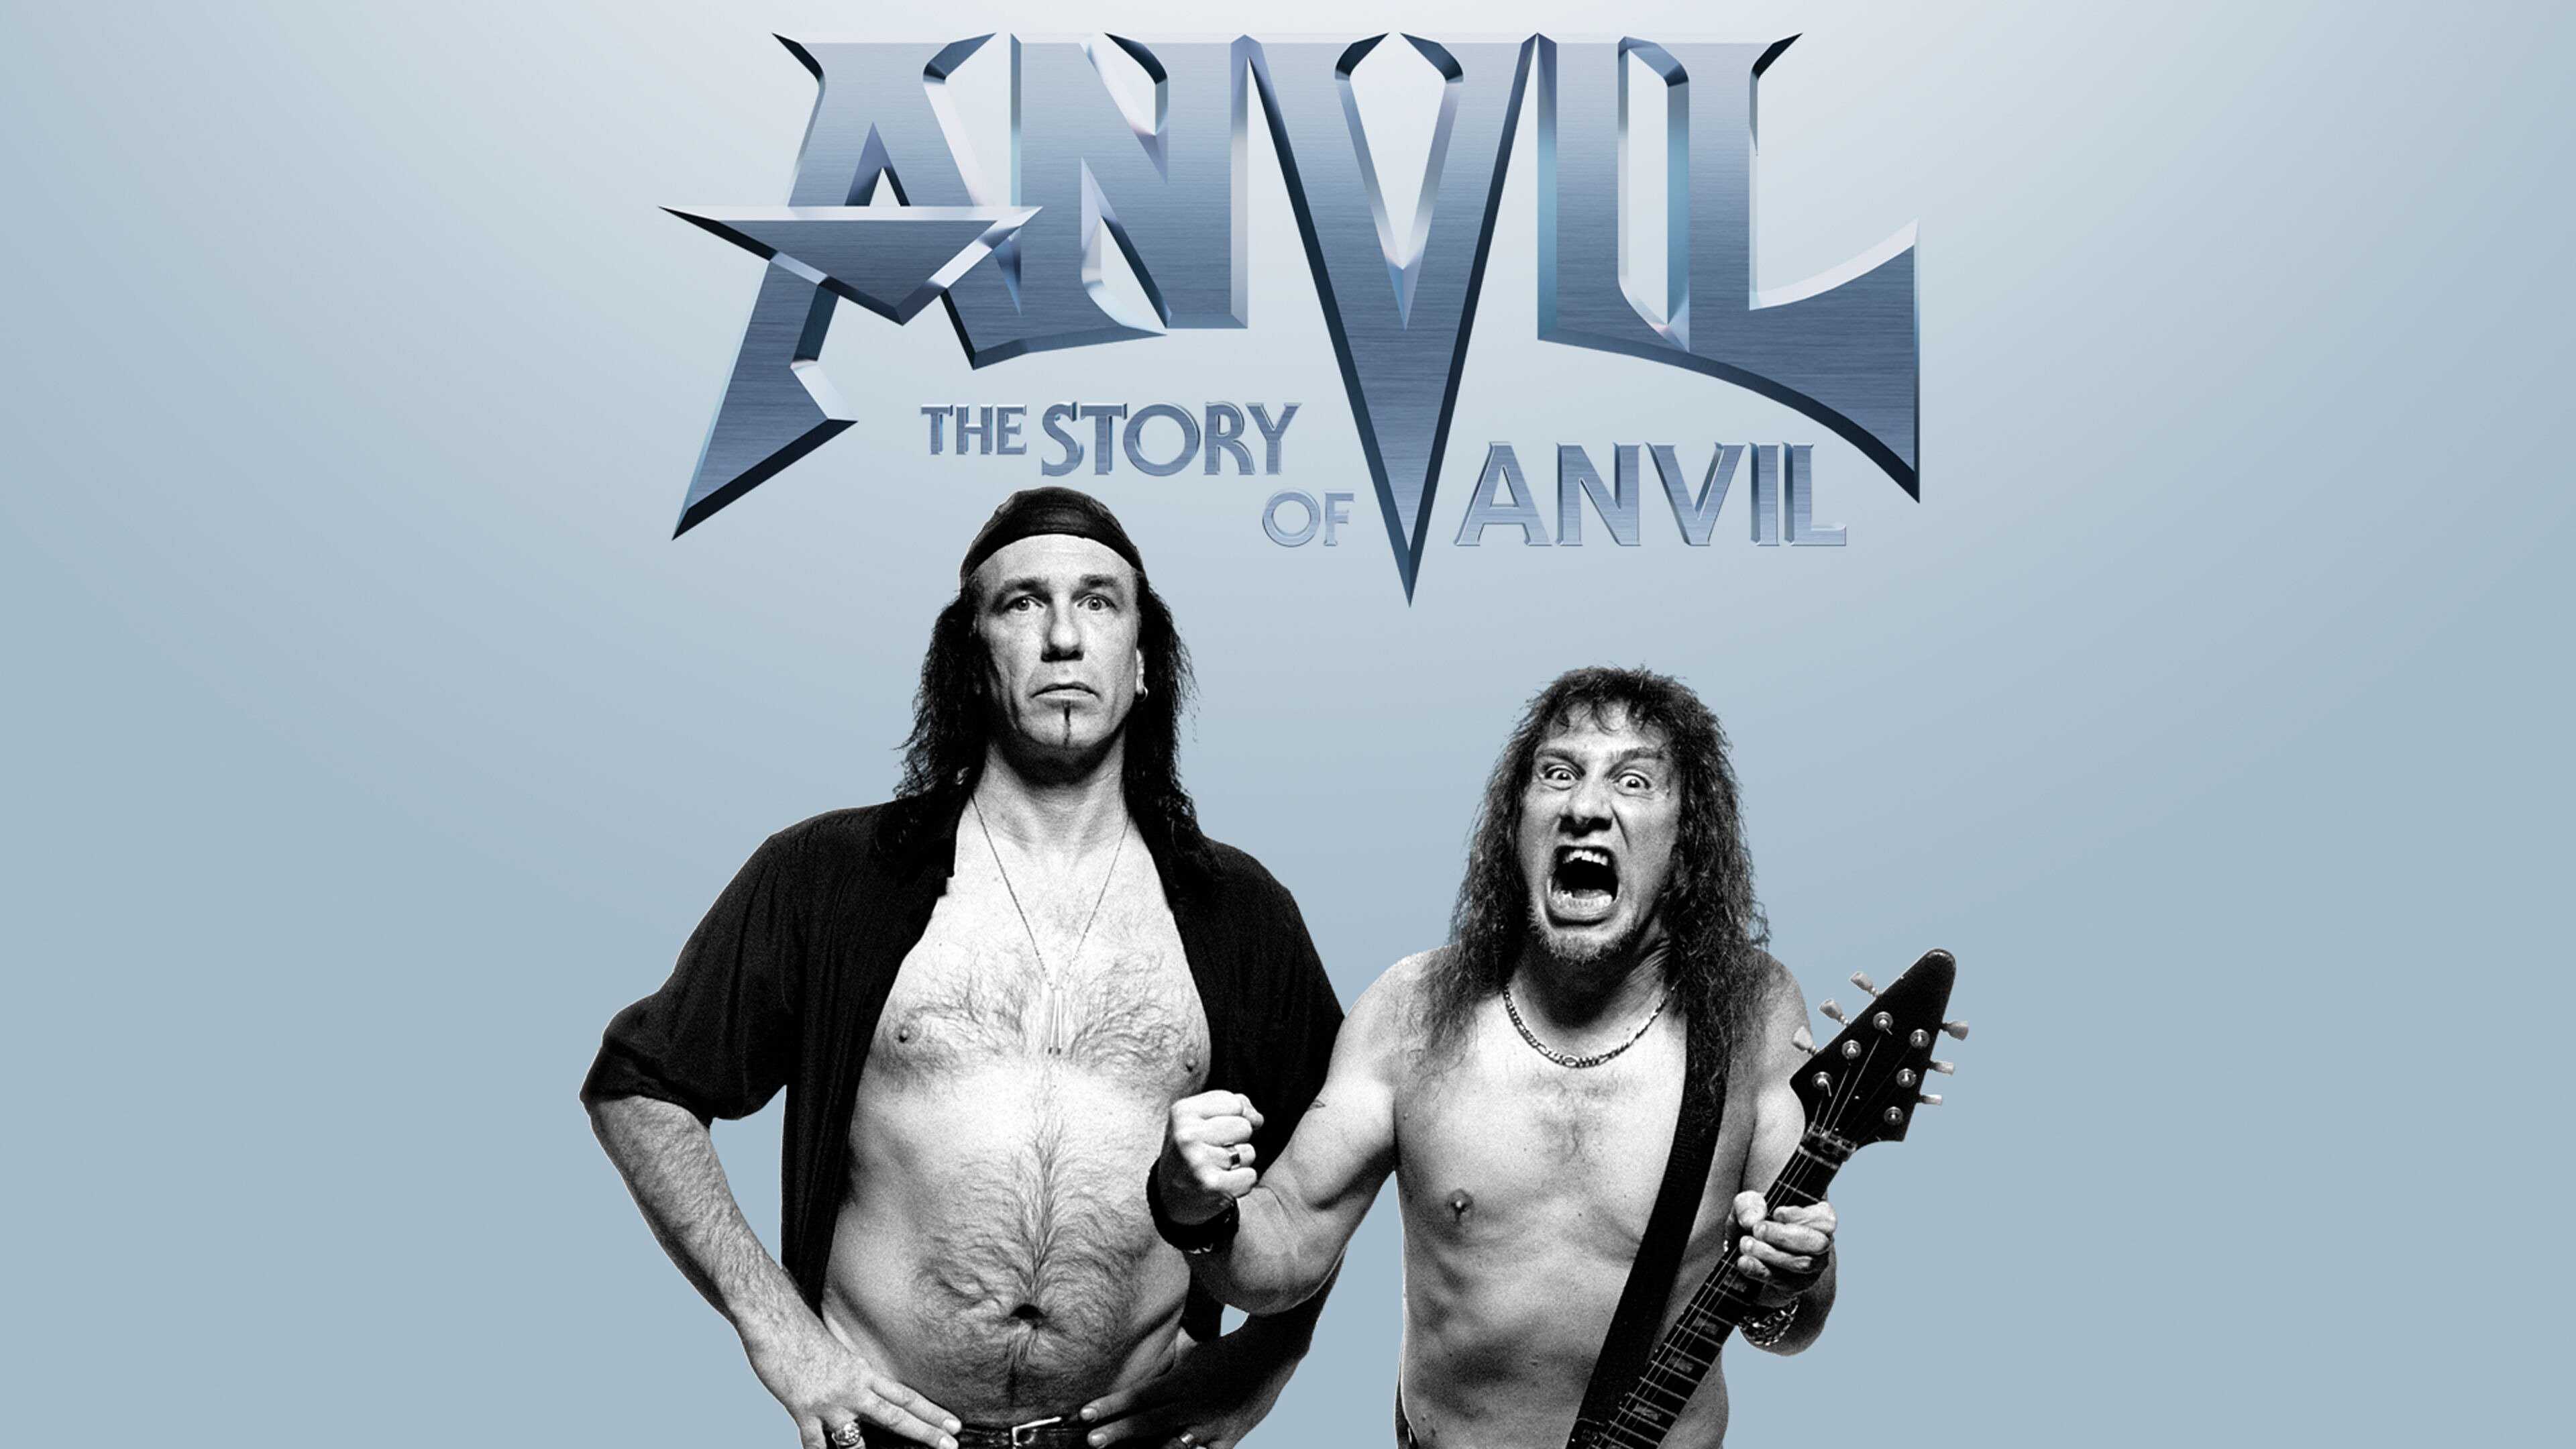 47-facts-about-the-movie-anvil-the-story-of-anvil